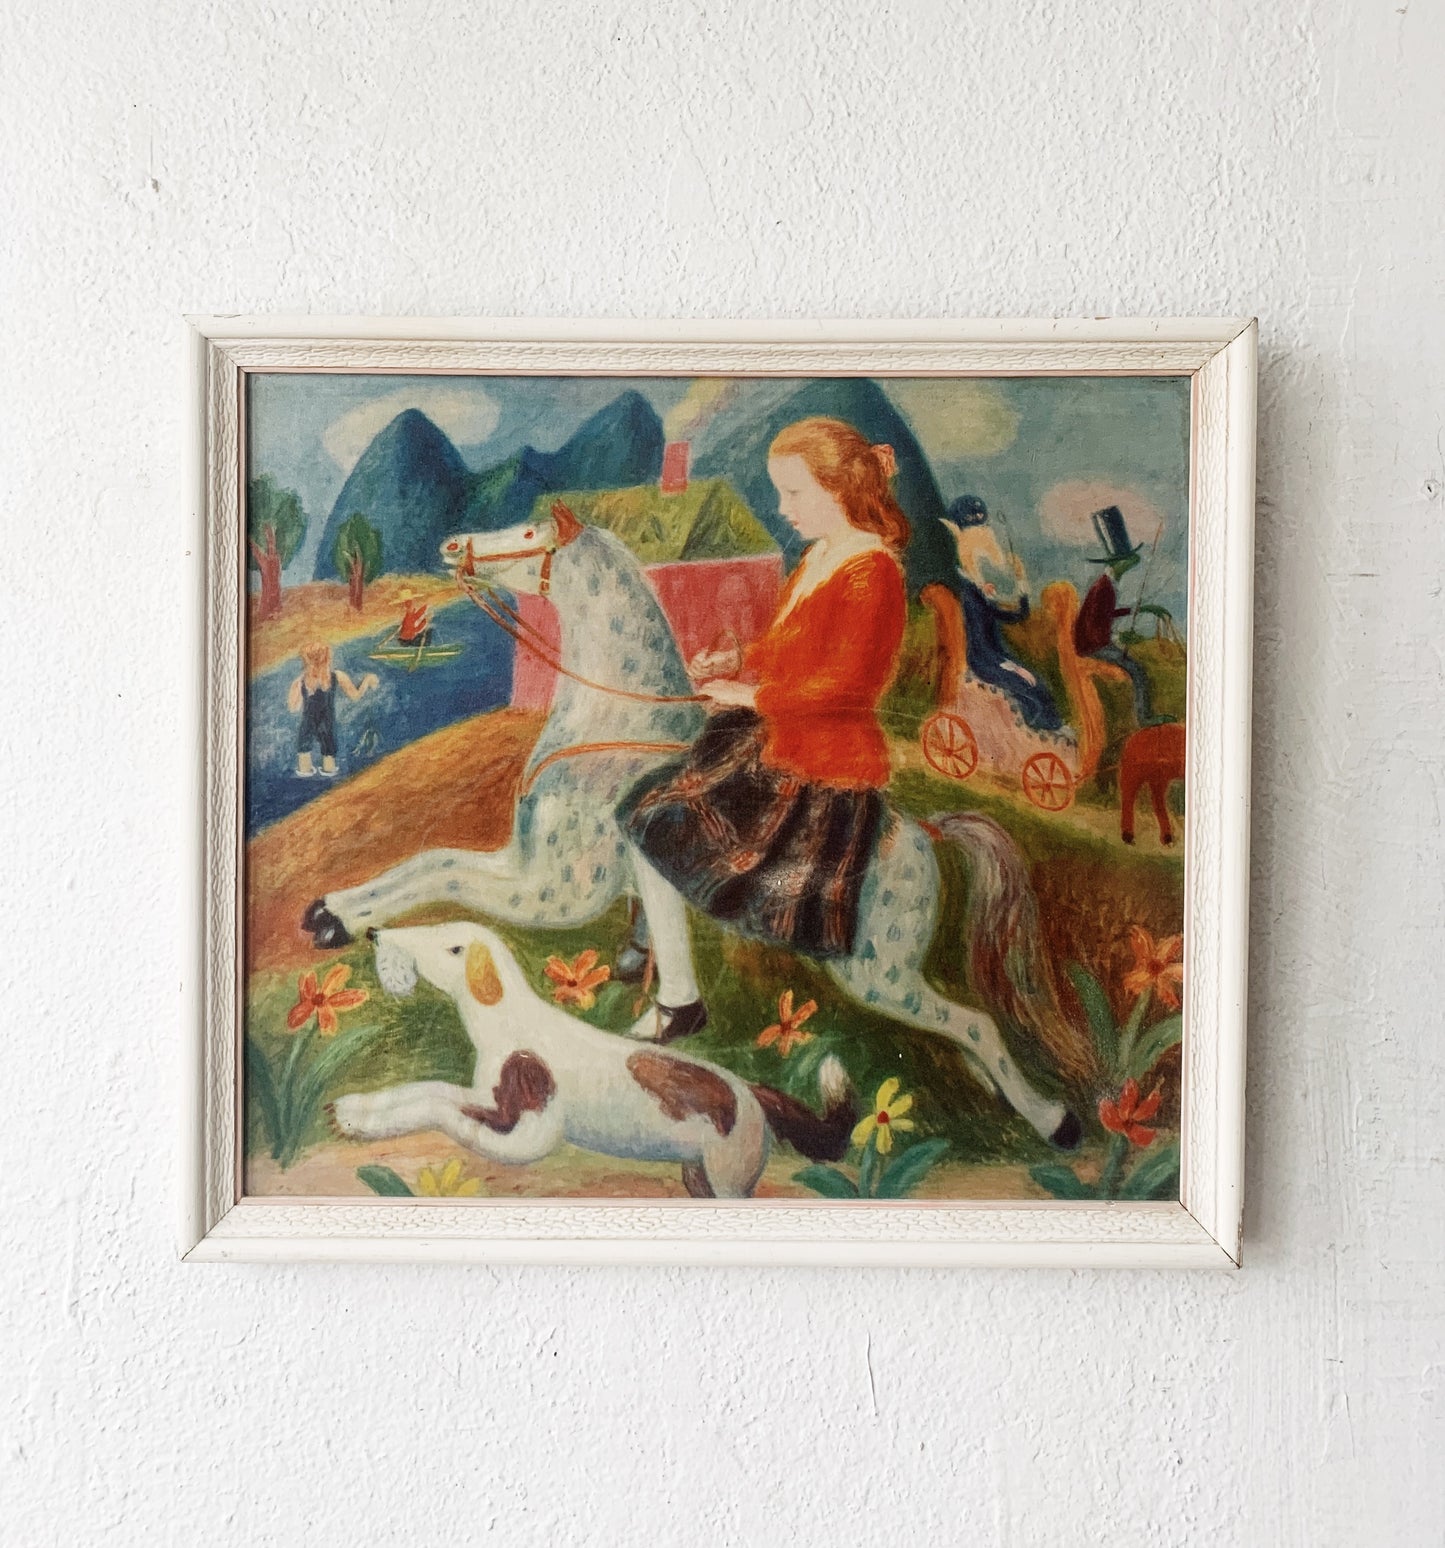 Vintage Framed Lithograph ‘The Dream Ride’